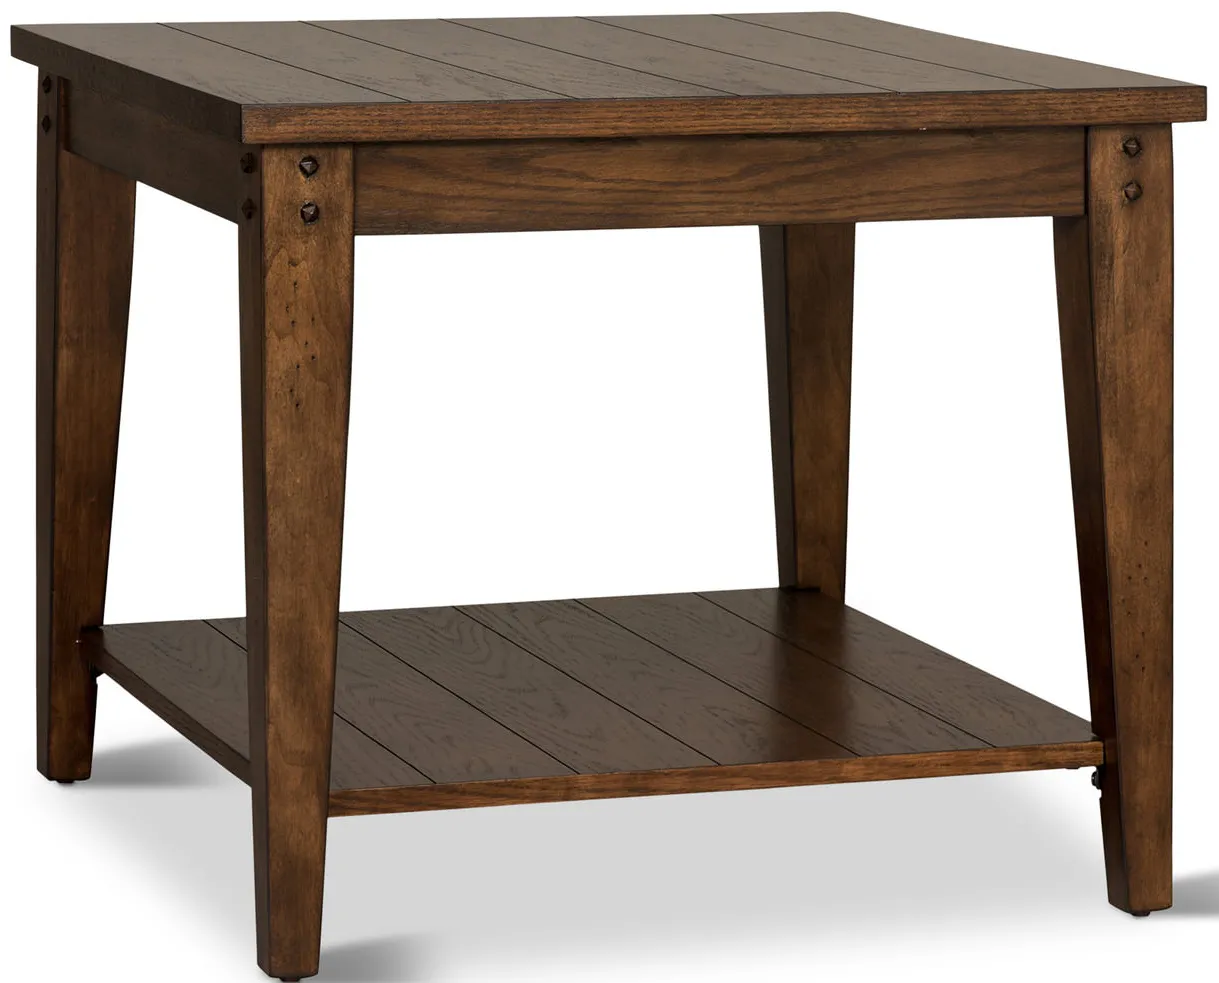 Cabin Square End Table - Rustic Brown